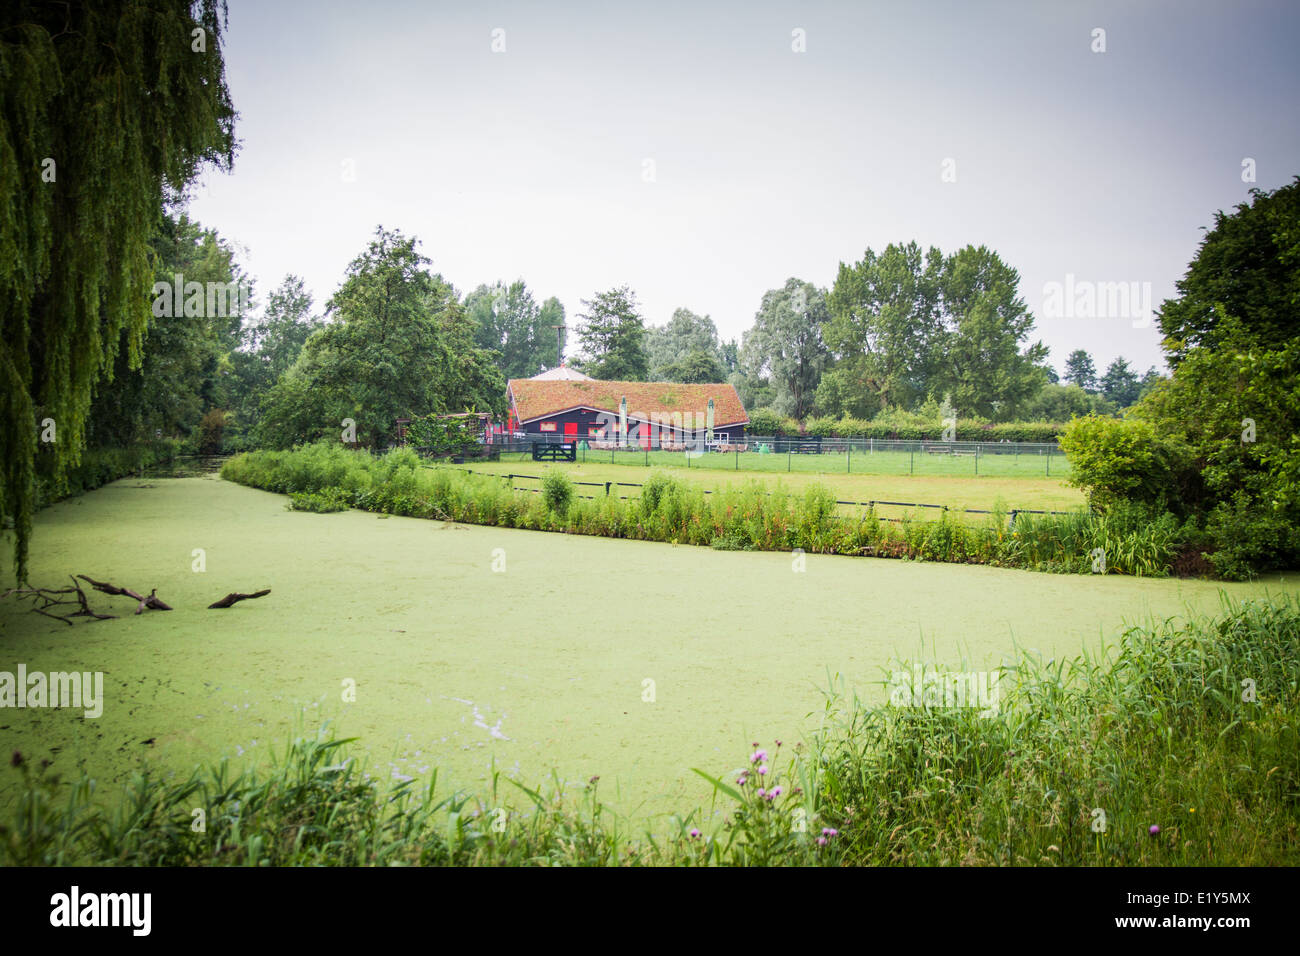 Farmhouse with greenroof in a park in Amsterdam Stock Photo